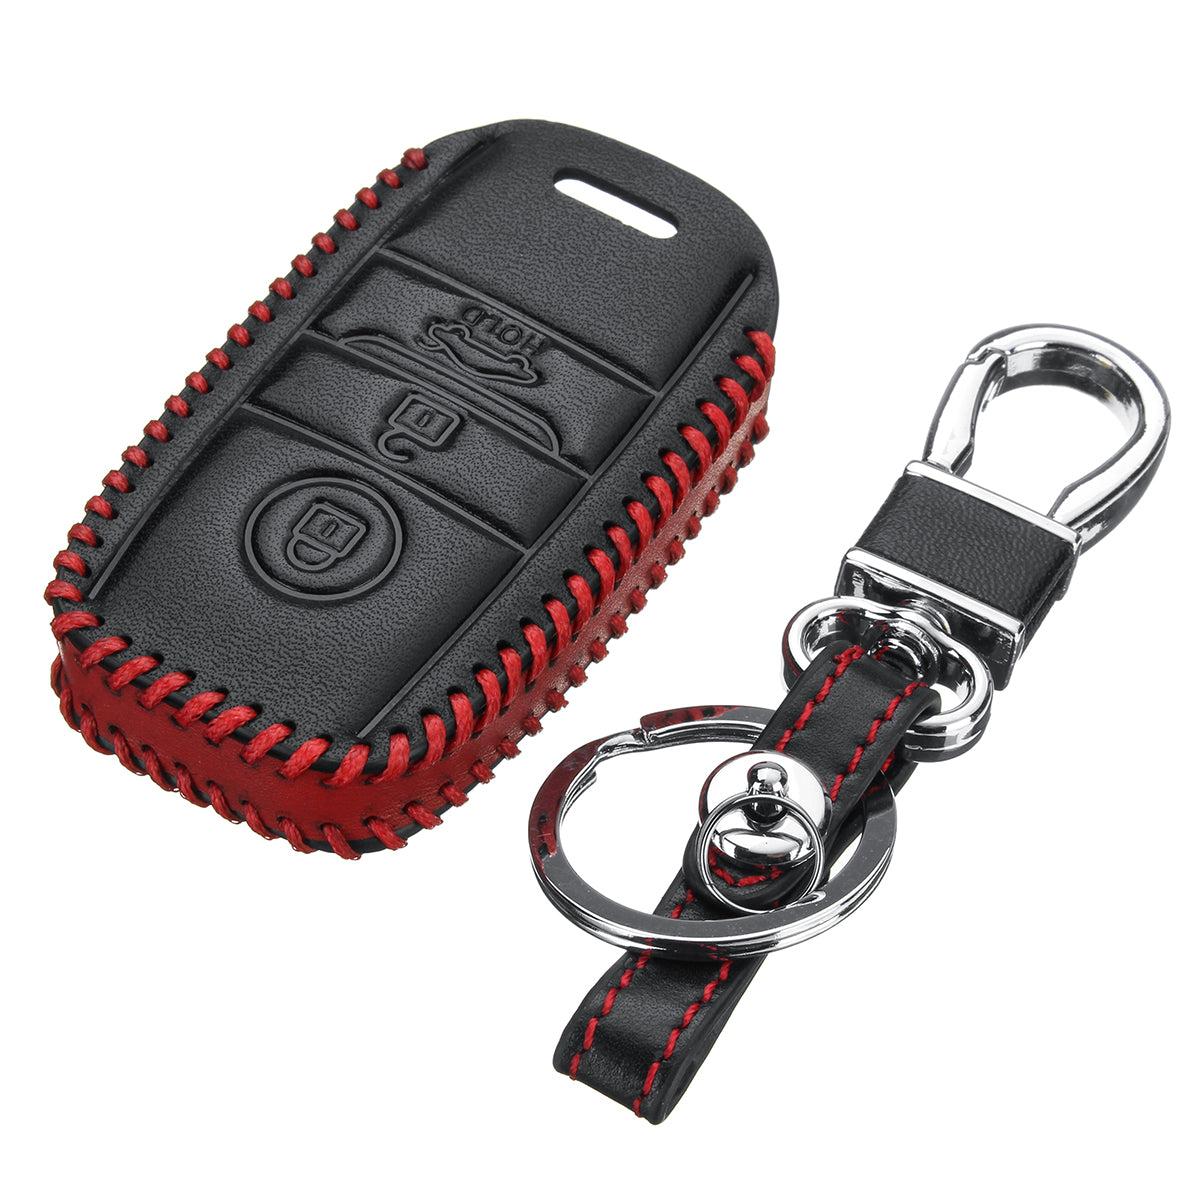 Dark Red PU Leather Smart Remote Car Key Case/Bag 3 Button Cover Protector Holder for KIA